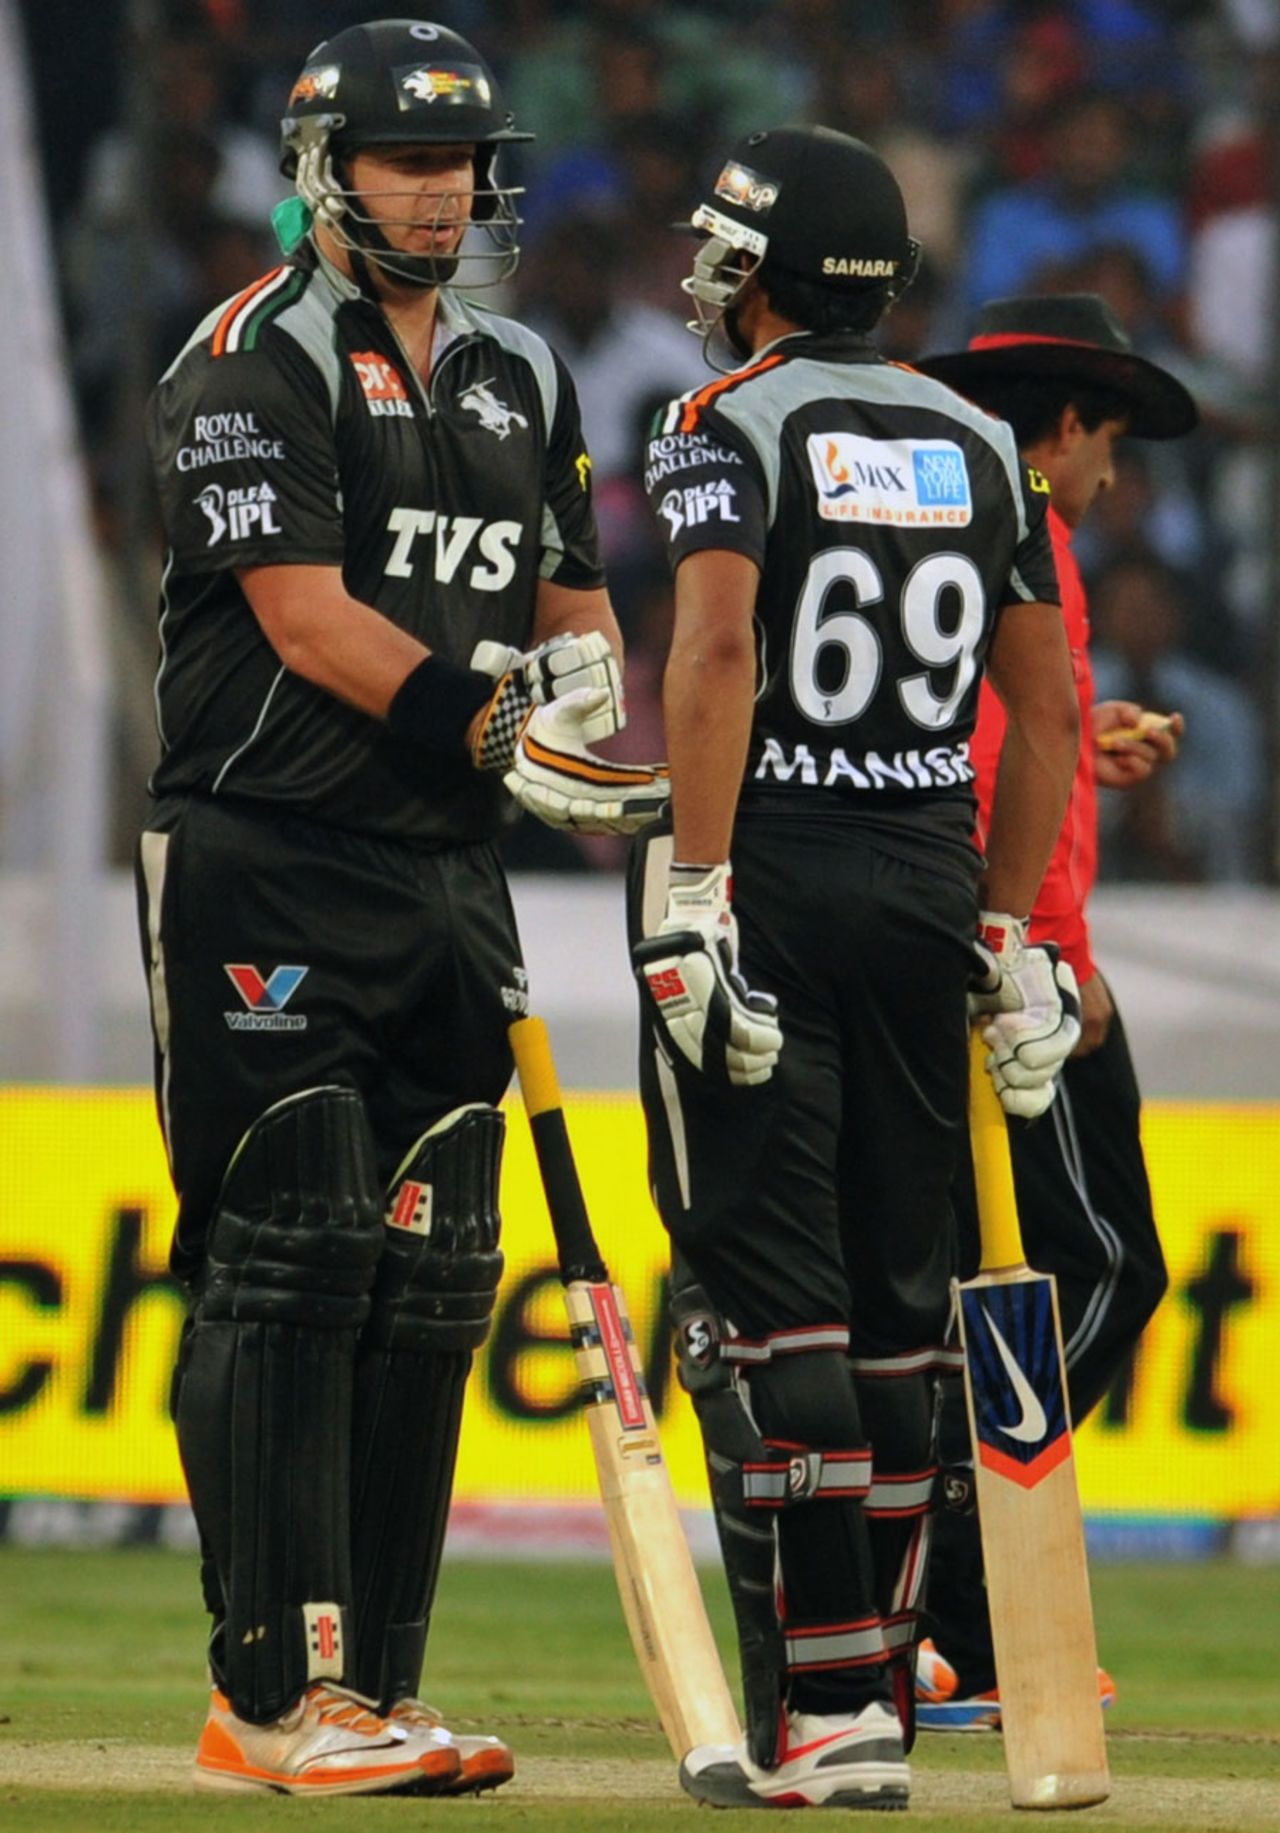 Jesse Ryder and Manish Pandey added 55 in quick time, Deccan Chargers v Pune Warriors, IPL 2011, Hyderabad, April 10, 2011